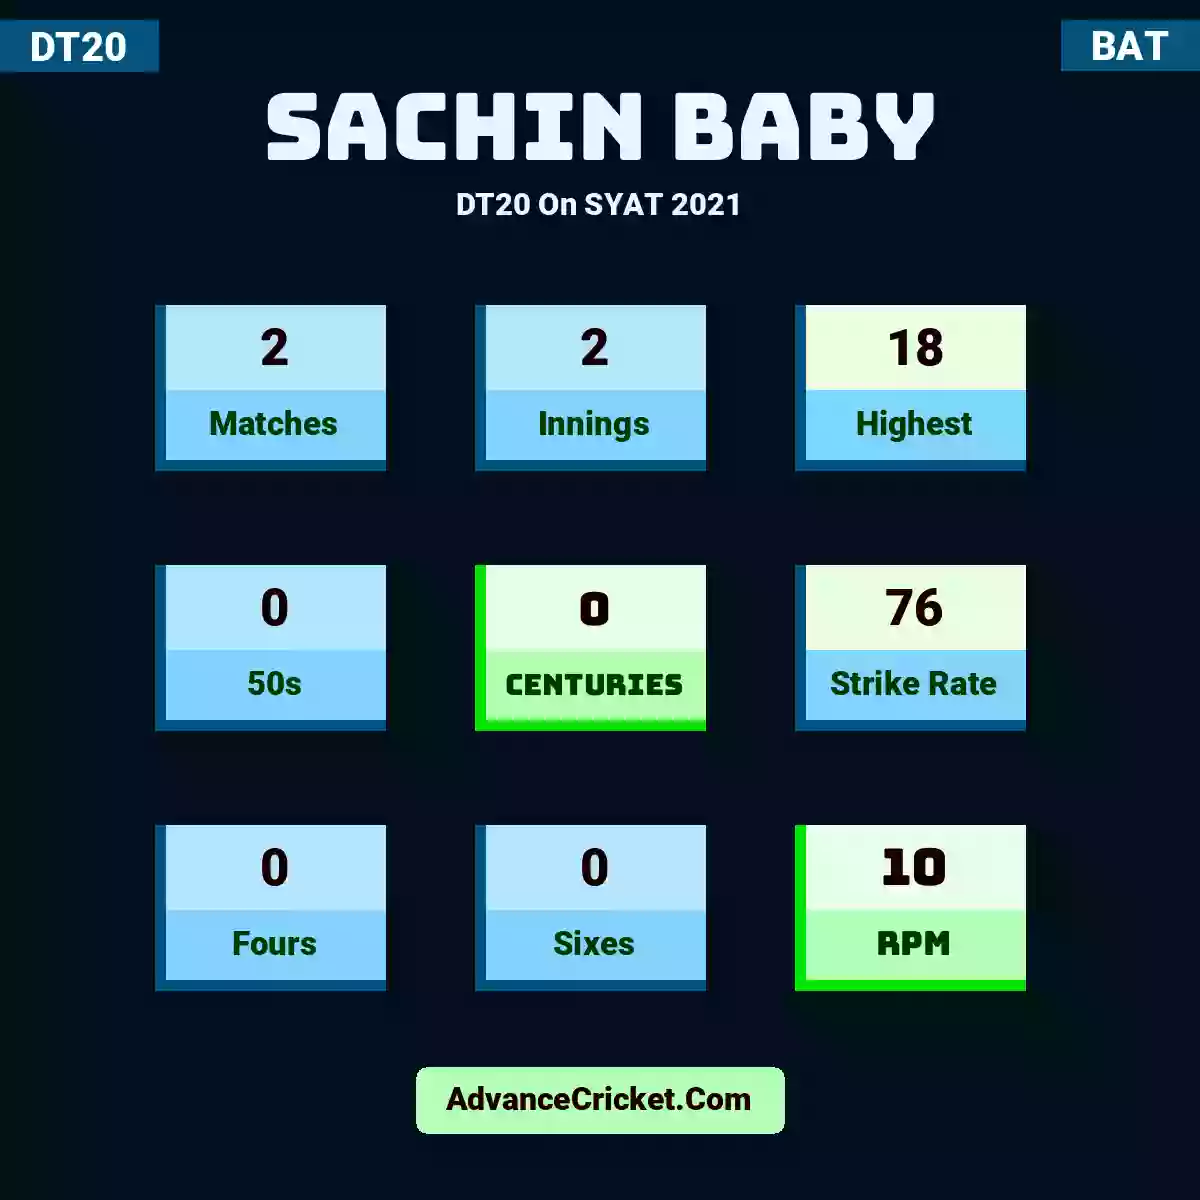 Sachin Baby DT20  On SYAT 2021, Sachin Baby played 2 matches, scored 18 runs as highest, 0 half-centuries, and 0 centuries, with a strike rate of 76. S.Baby hit 0 fours and 0 sixes, with an RPM of 10.